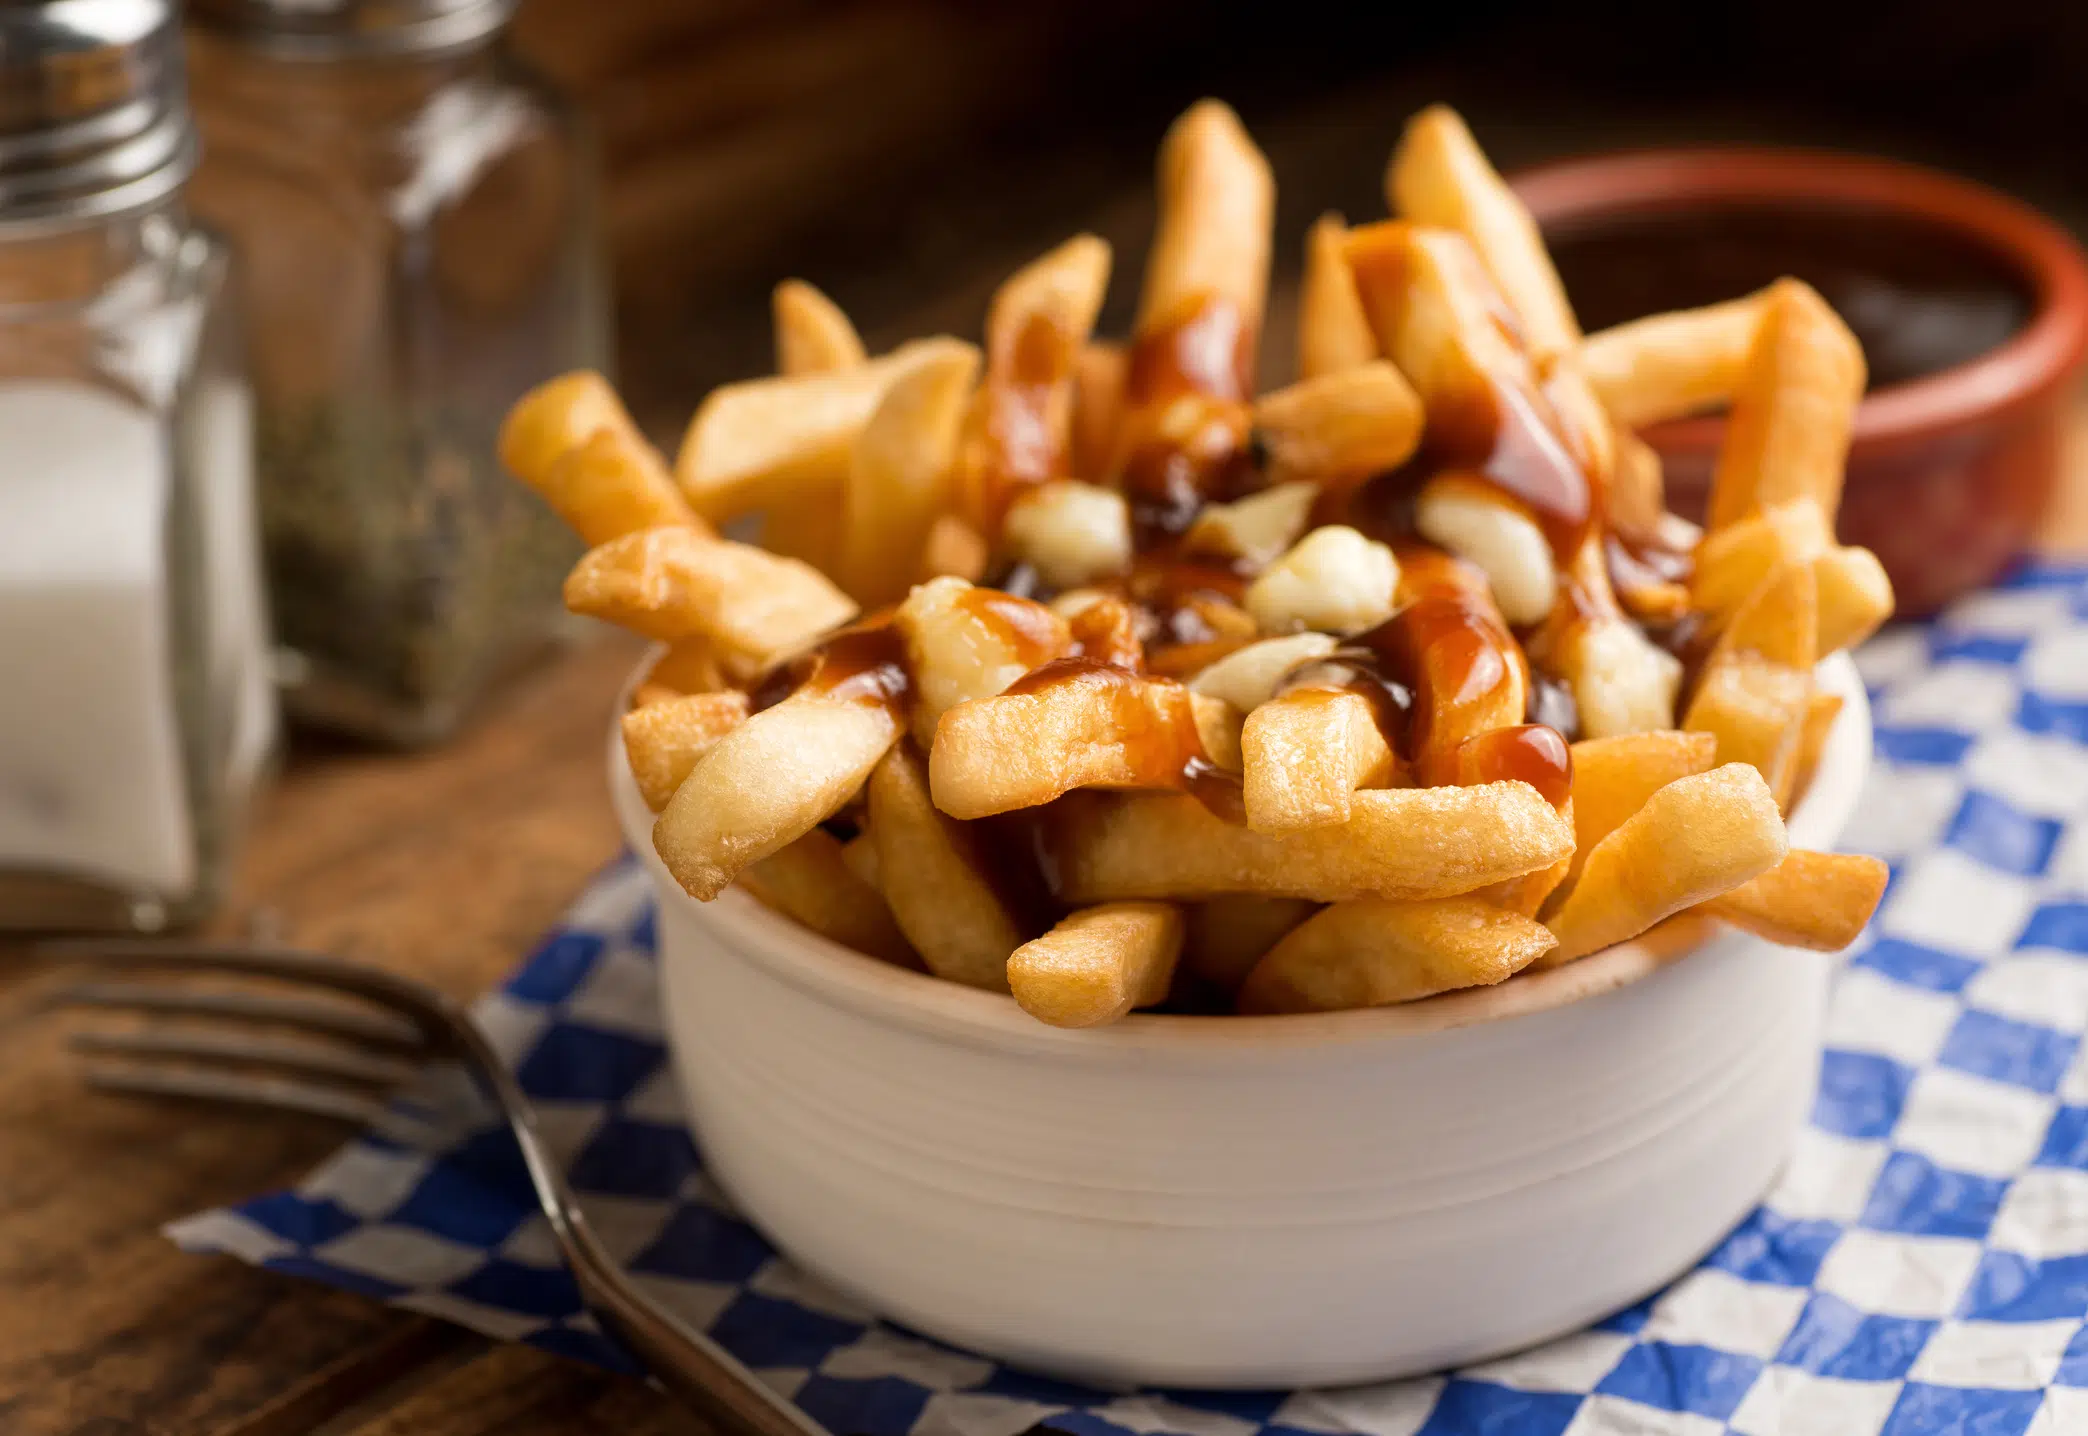 Canada's best 5 poutines...if you can call them that